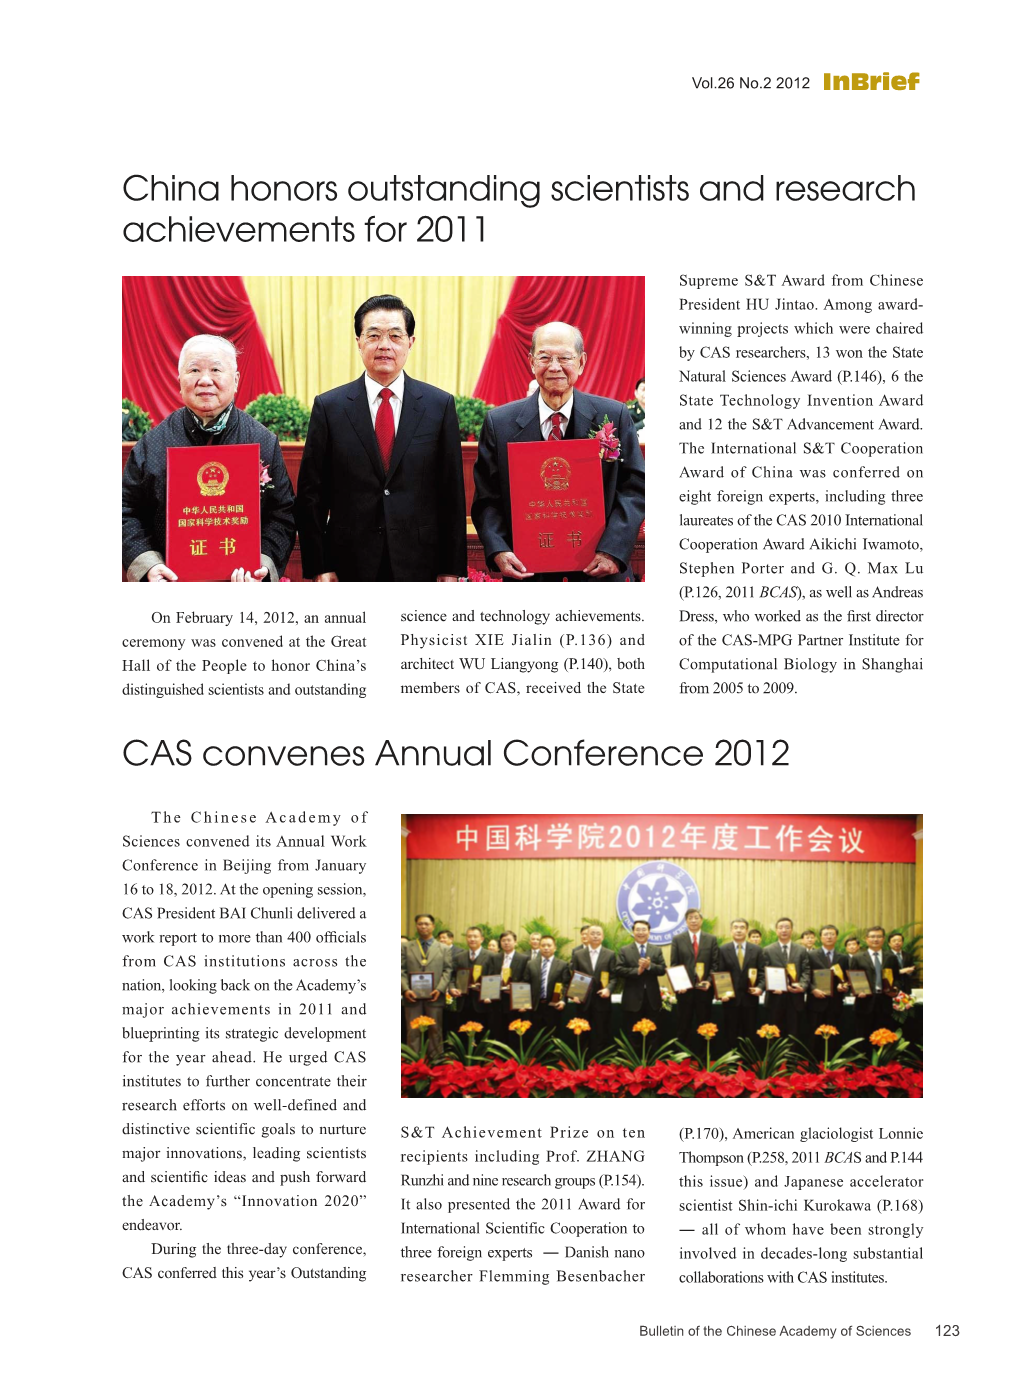 CAS Convenes Annual Conference 2012 China Honors Outstanding